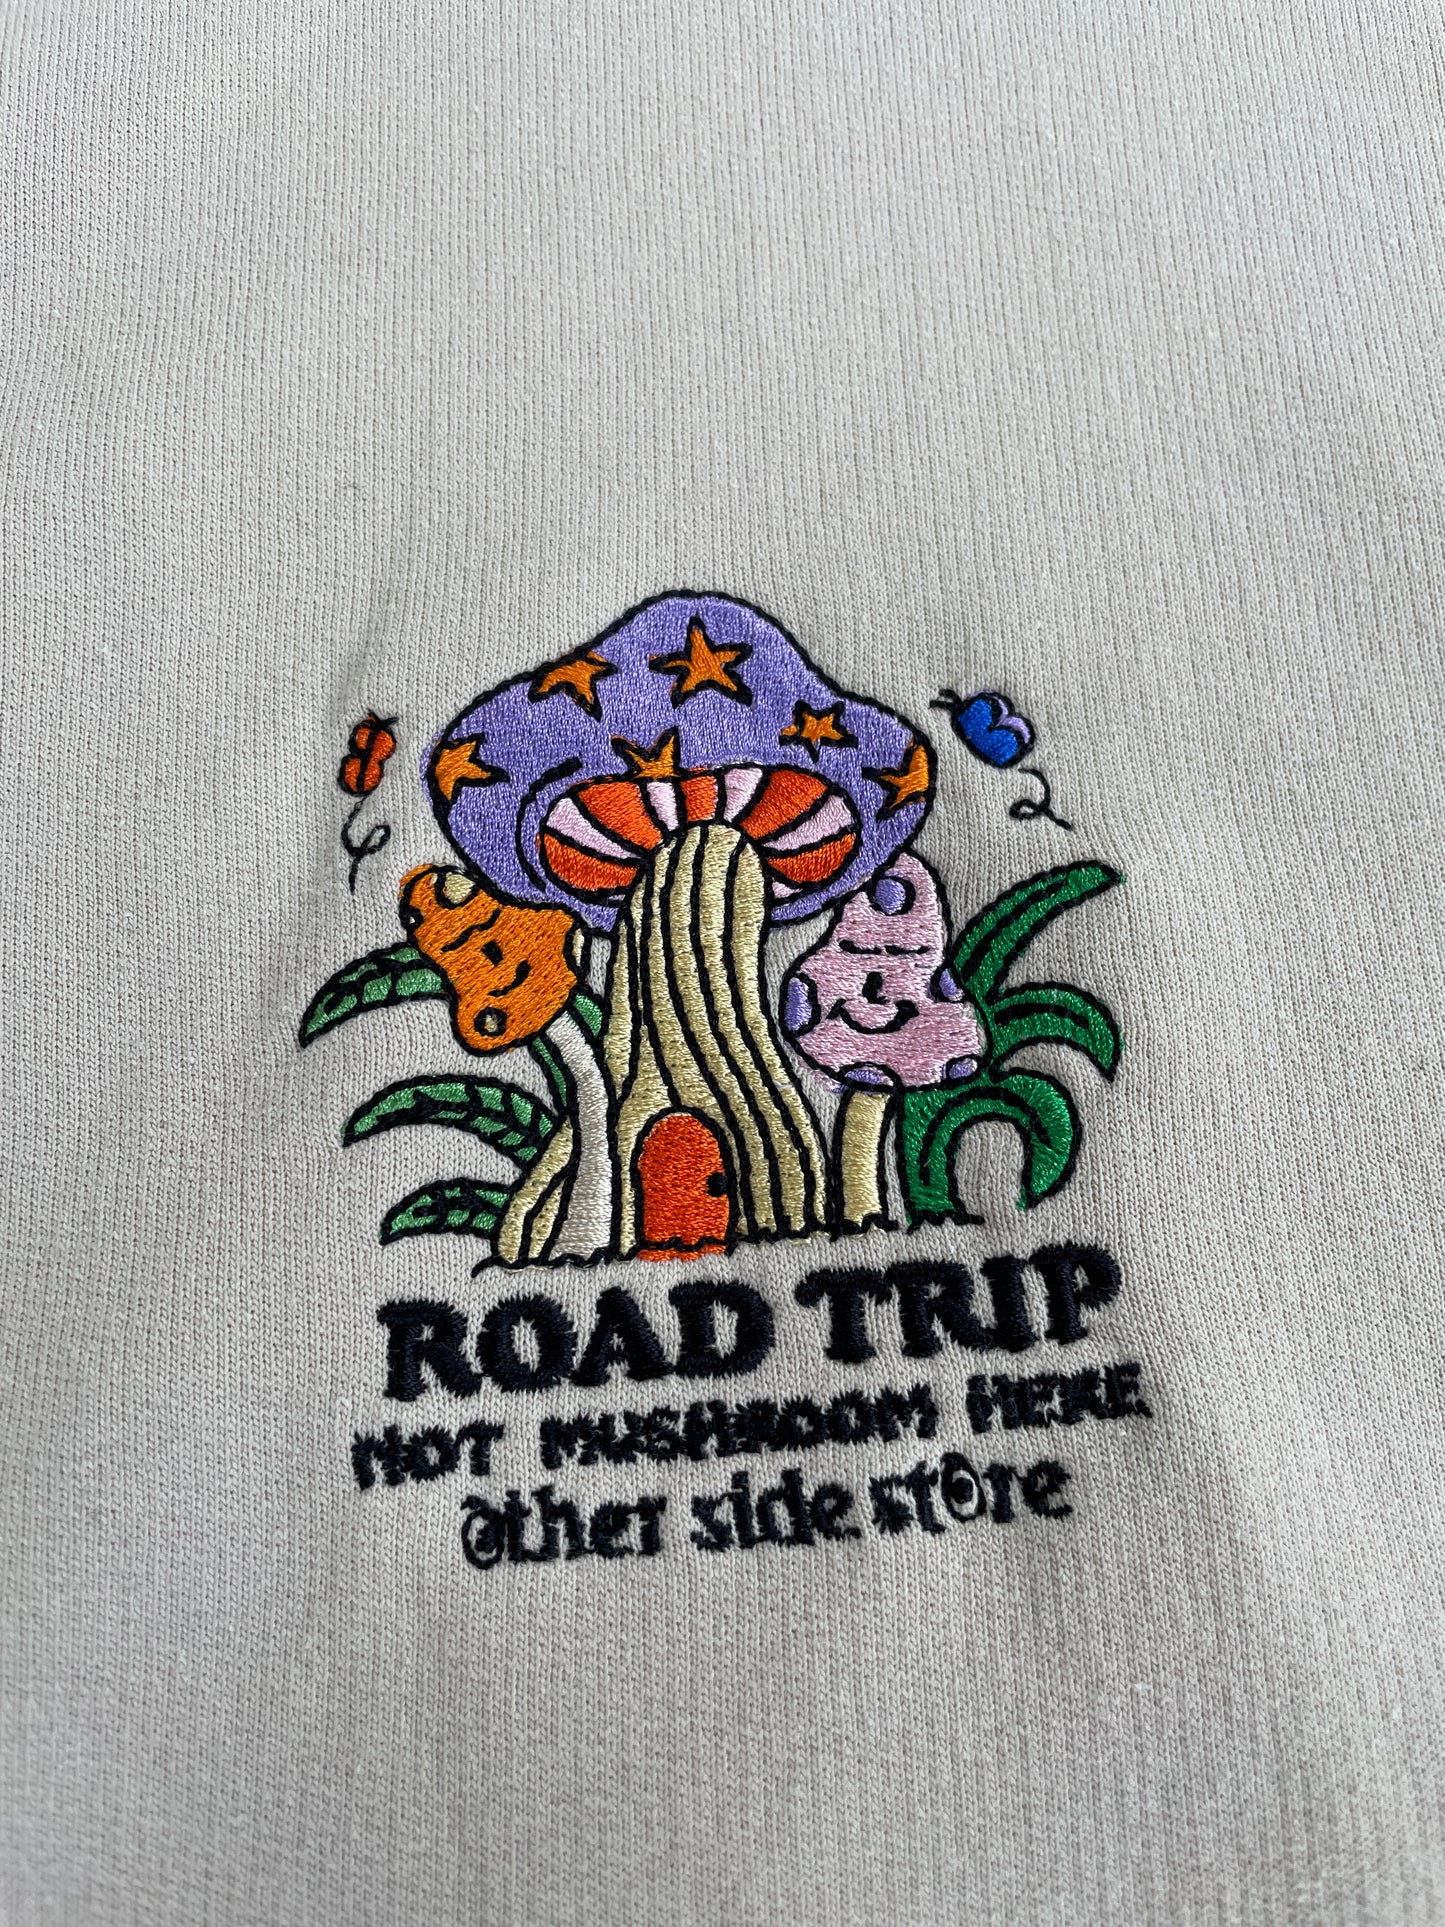 Other Side Store 'Road Trip' Embroidered Sweater - Black / Sand